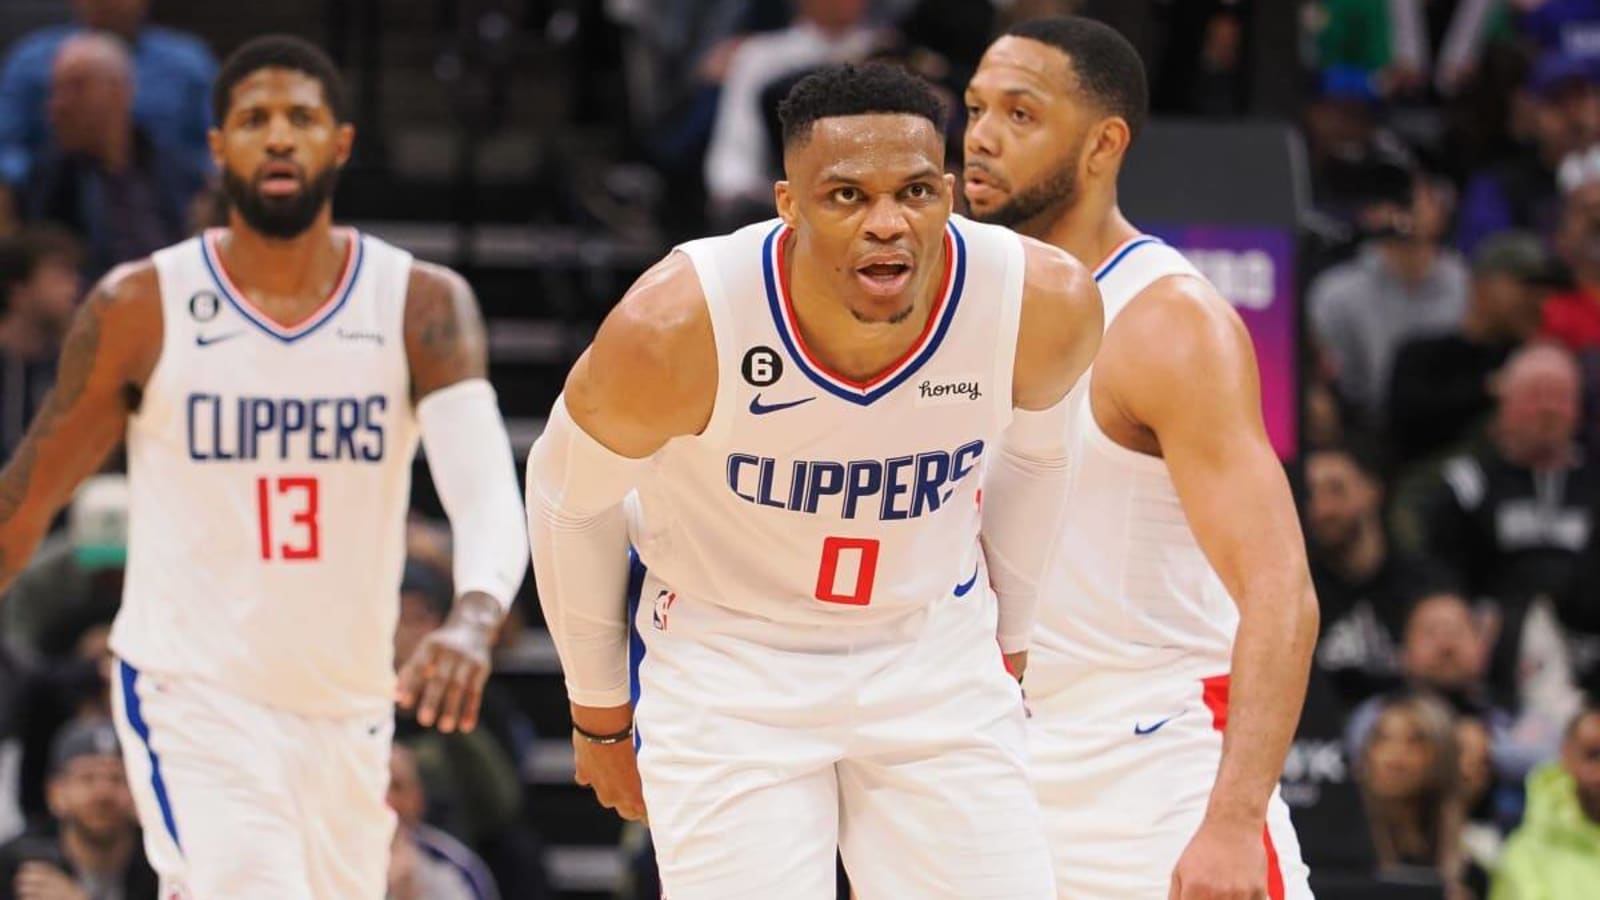 Russell Westbrook's Clippers Debut!